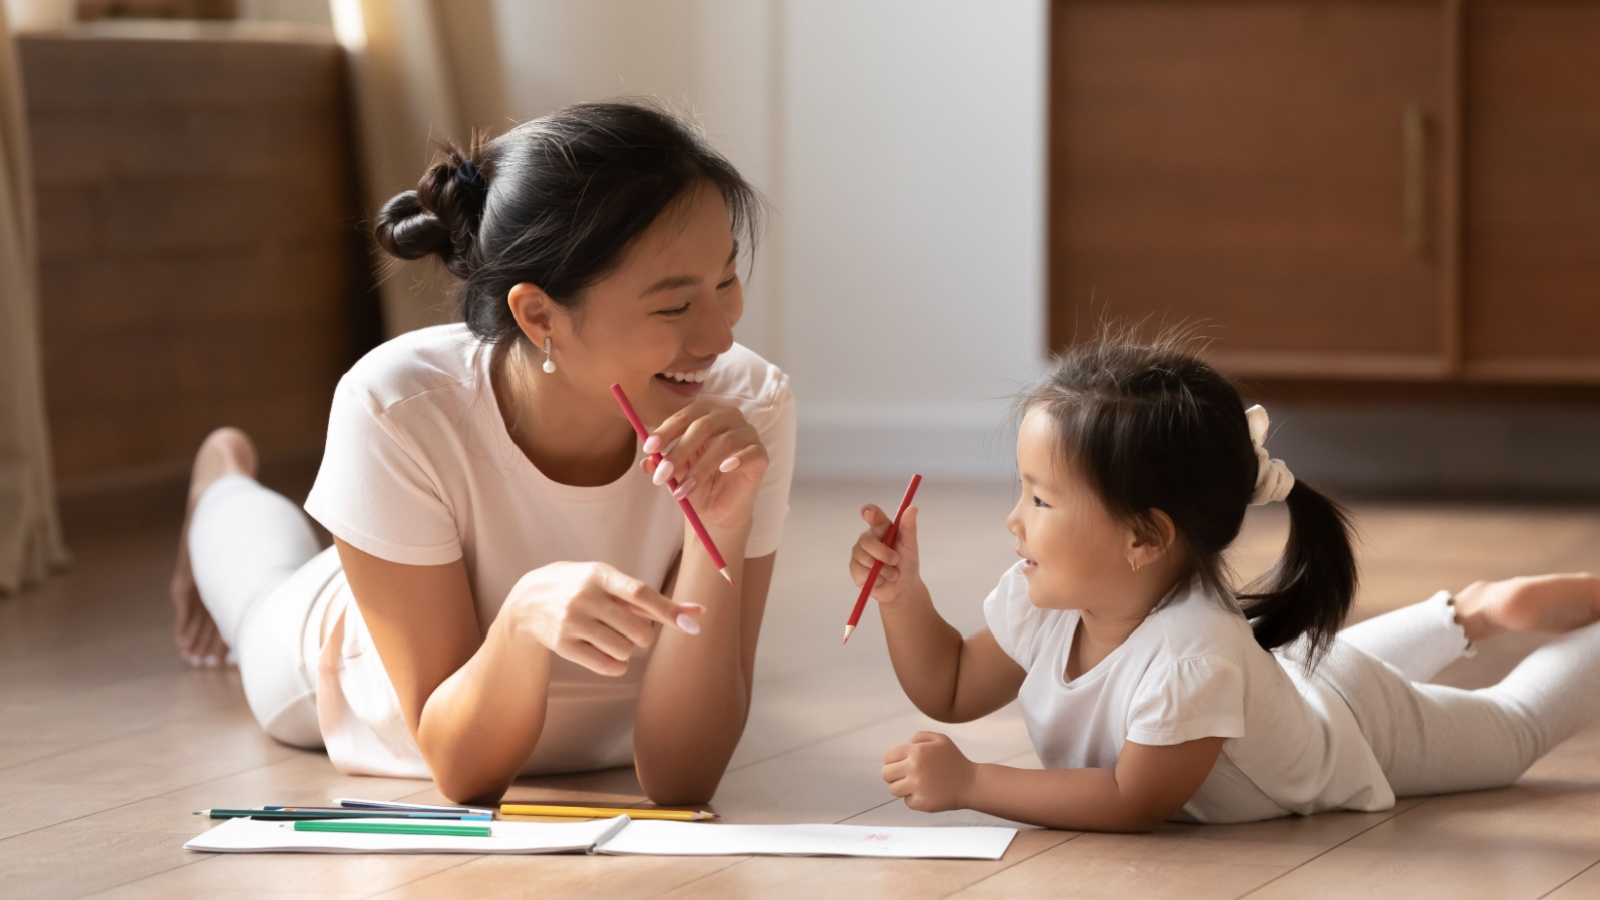 image credit: fizkes/shutterstock <p>Encourage your child to tell stories through their drawings. They can illustrate a day in their life or an entirely imagined tale. Seeing your child’s stories come to life through art can be awe-inspiring and encourages narrative skills and artistic development.</p>